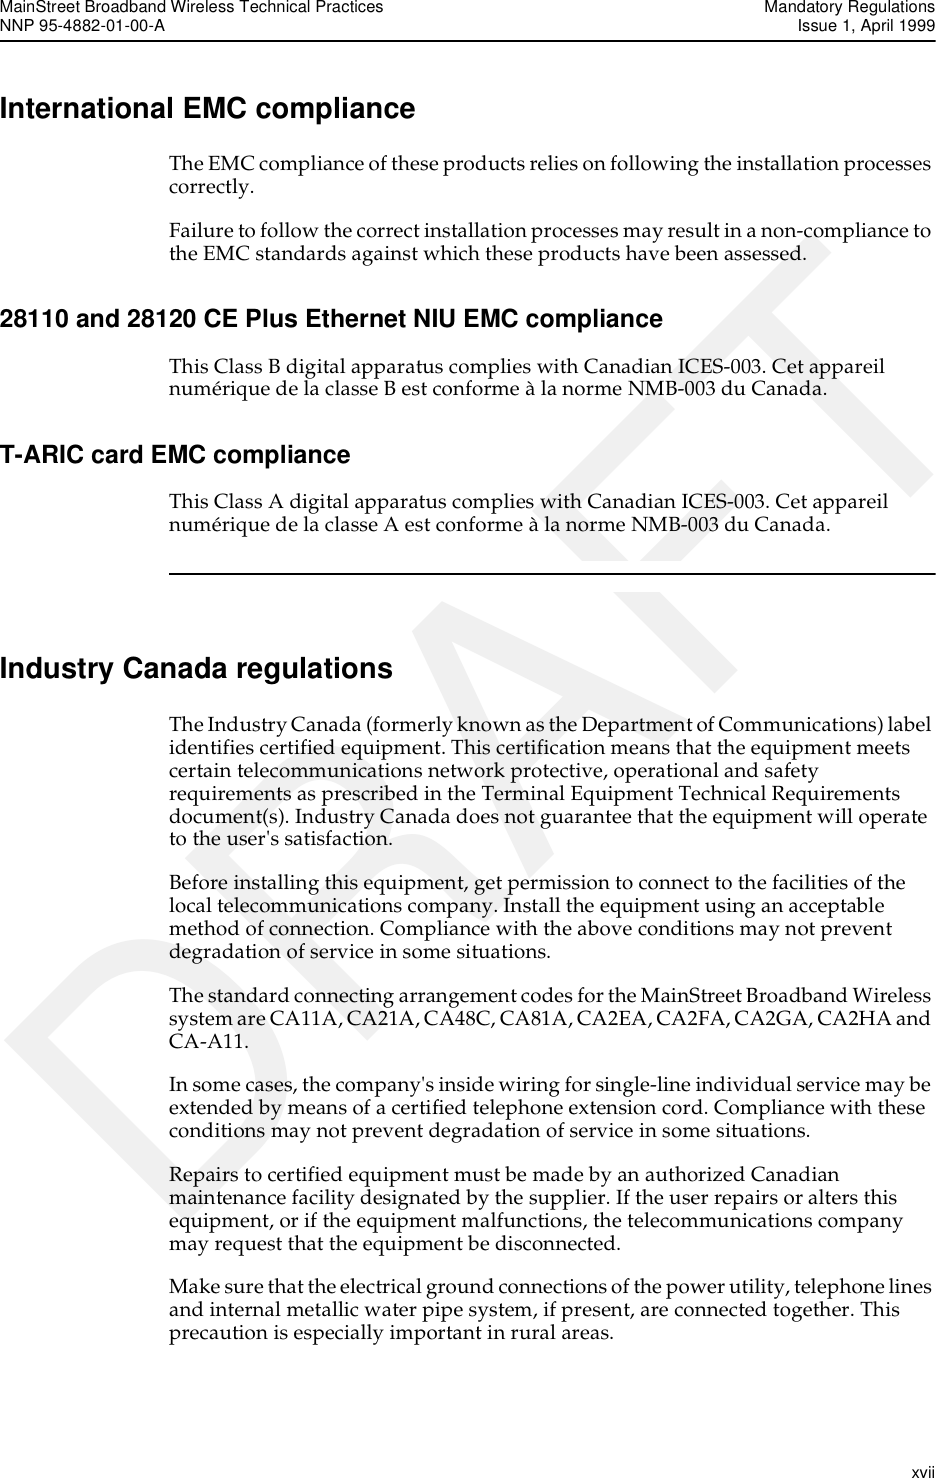 MainStreet Broadband Wireless Technical Practices Mandatory RegulationsNNP 95-4882-01-00-A  Issue 1, April 1999   xviiDRAFTInternational EMC complianceThe EMC compliance of these products relies on following the installation processes correctly. Failure to follow the correct installation processes may result in a non-compliance to the EMC standards against which these products have been assessed.28110 and 28120 CE Plus Ethernet NIU EMC complianceThis Class B digital apparatus complies with Canadian ICES-003. Cet appareil numérique de la classe B est conforme à la norme NMB-003 du Canada.T-ARIC card EMC complianceThis Class A digital apparatus complies with Canadian ICES-003. Cet appareil numérique de la classe A est conforme à la norme NMB-003 du Canada.Industry Canada regulationsThe Industry Canada (formerly known as the Department of Communications) label identifies certified equipment. This certification means that the equipment meets certain telecommunications network protective, operational and safety requirements as prescribed in the Terminal Equipment Technical Requirements document(s). Industry Canada does not guarantee that the equipment will operate to the user&apos;s satisfaction.Before installing this equipment, get permission to connect to the facilities of the local telecommunications company. Install the equipment using an acceptable method of connection. Compliance with the above conditions may not prevent degradation of service in some situations.The standard connecting arrangement codes for the MainStreet Broadband Wireless system are CA11A, CA21A, CA48C, CA81A, CA2EA, CA2FA, CA2GA, CA2HA and CA-A11.In some cases, the company&apos;s inside wiring for single-line individual service may be extended by means of a certified telephone extension cord. Compliance with these conditions may not prevent degradation of service in some situations.Repairs to certified equipment must be made by an authorized Canadian maintenance facility designated by the supplier. If the user repairs or alters this equipment, or if the equipment malfunctions, the telecommunications company may request that the equipment be disconnected.Make sure that the electrical ground connections of the power utility, telephone lines and internal metallic water pipe system, if present, are connected together. This precaution is especially important in rural areas.